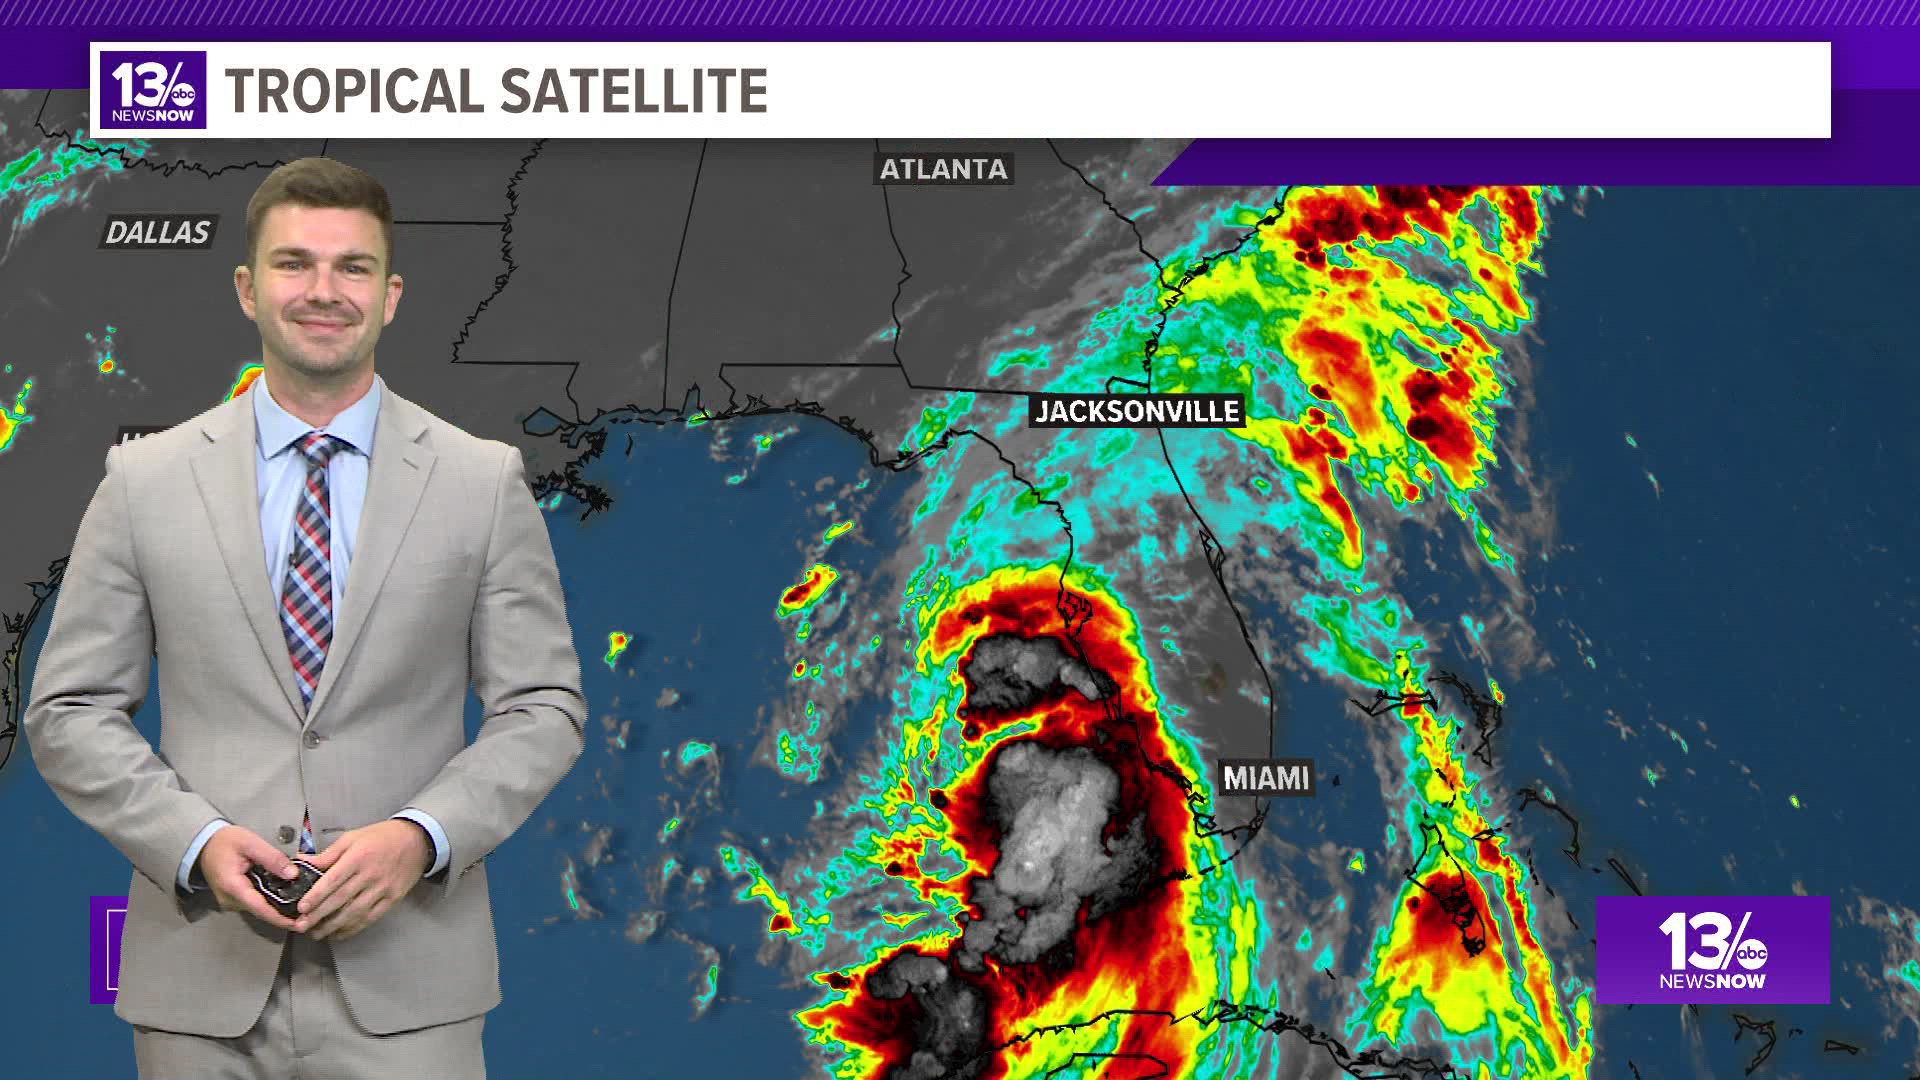 Tropical Storm Debby is expected to become a hurricane Sunday evening and continue moving over the eastern Gulf of Mexico, reaching the Big Bend of Florida by early